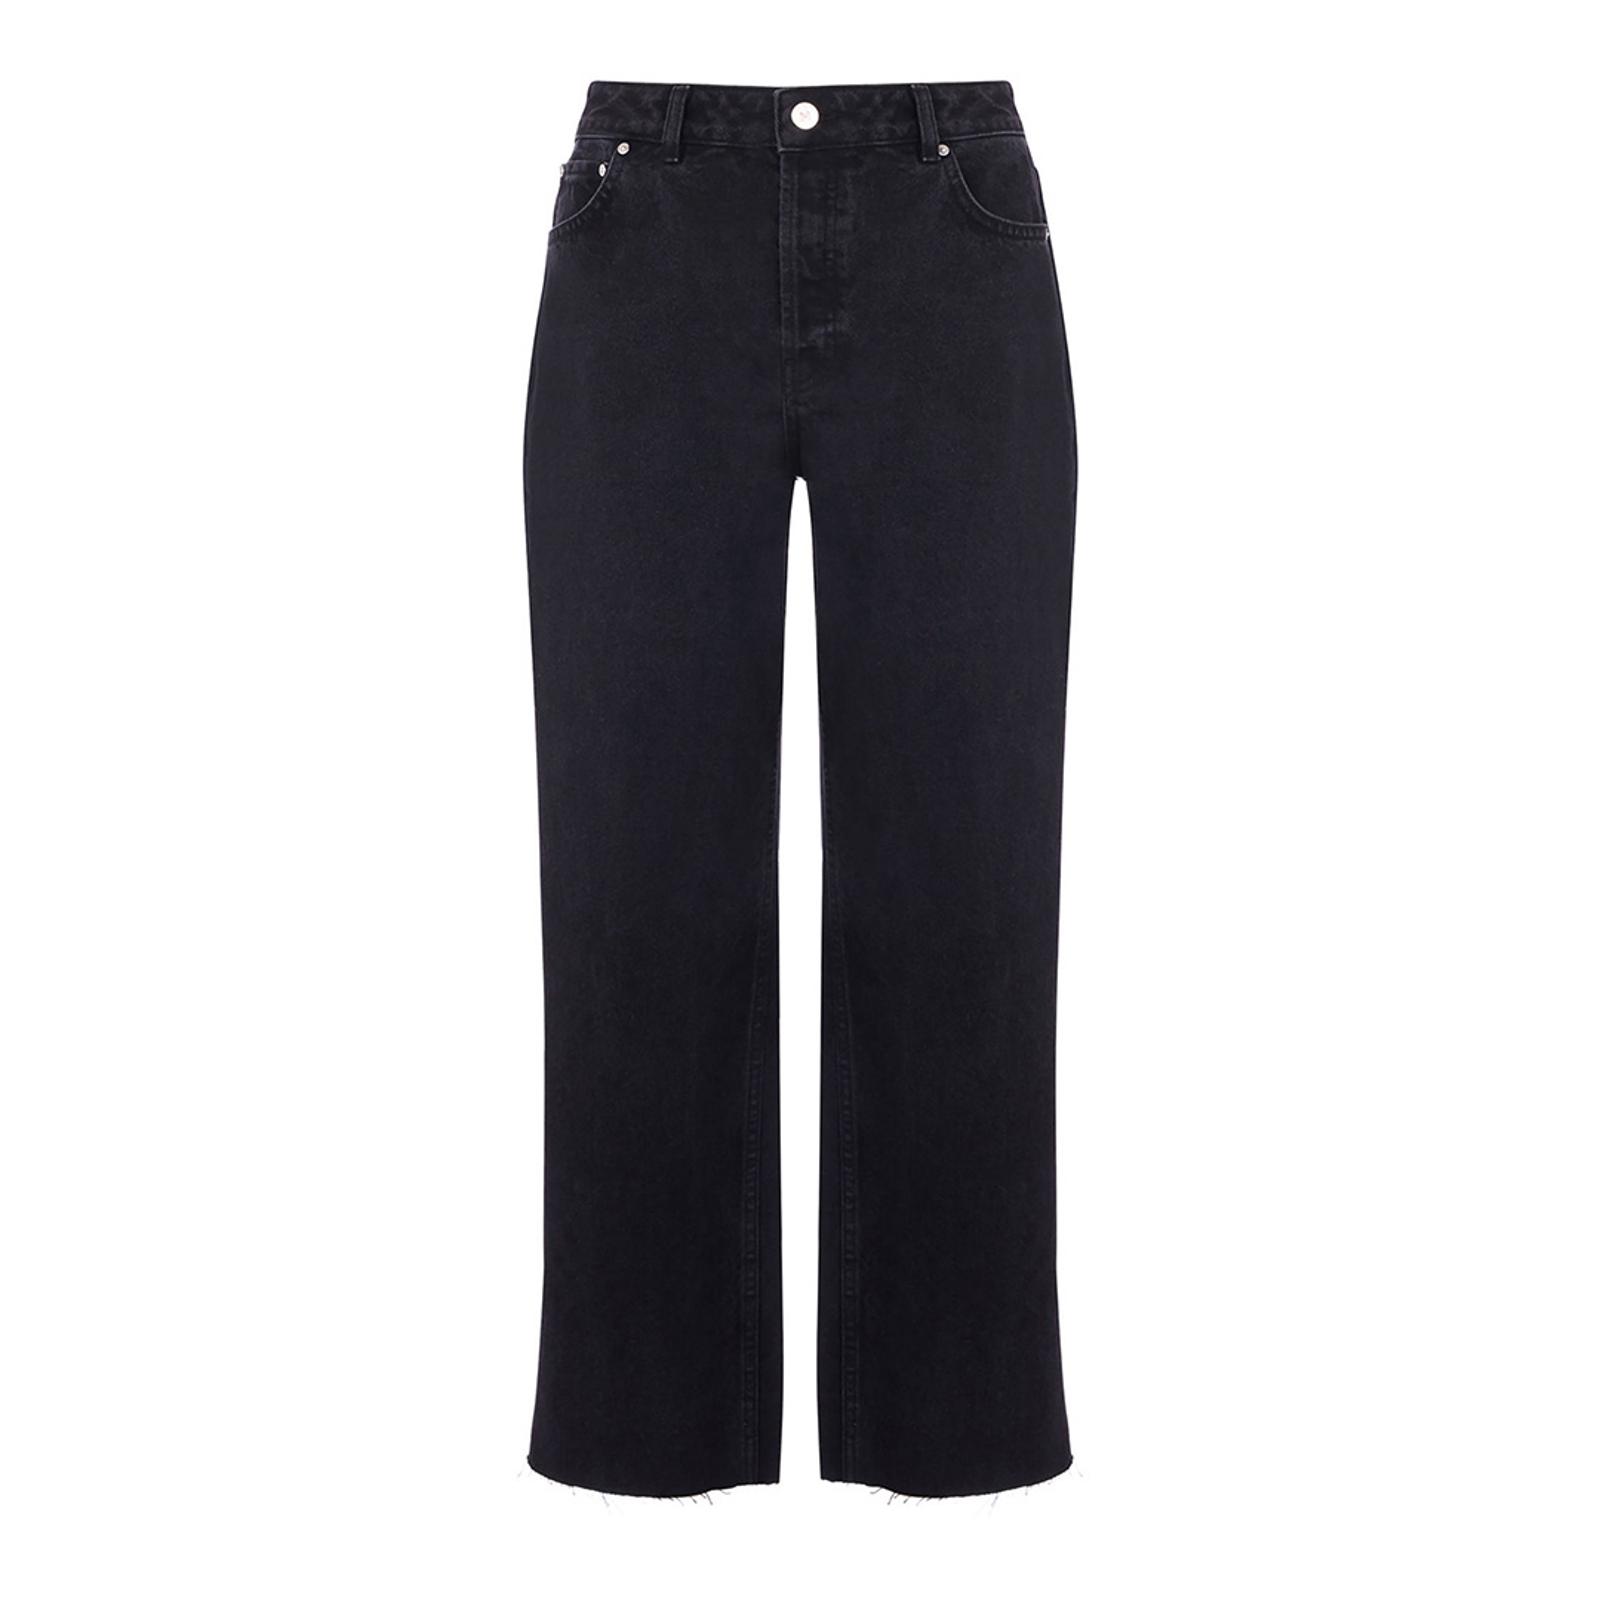 Black Straight Mid Rise Jeans - BrandAlley